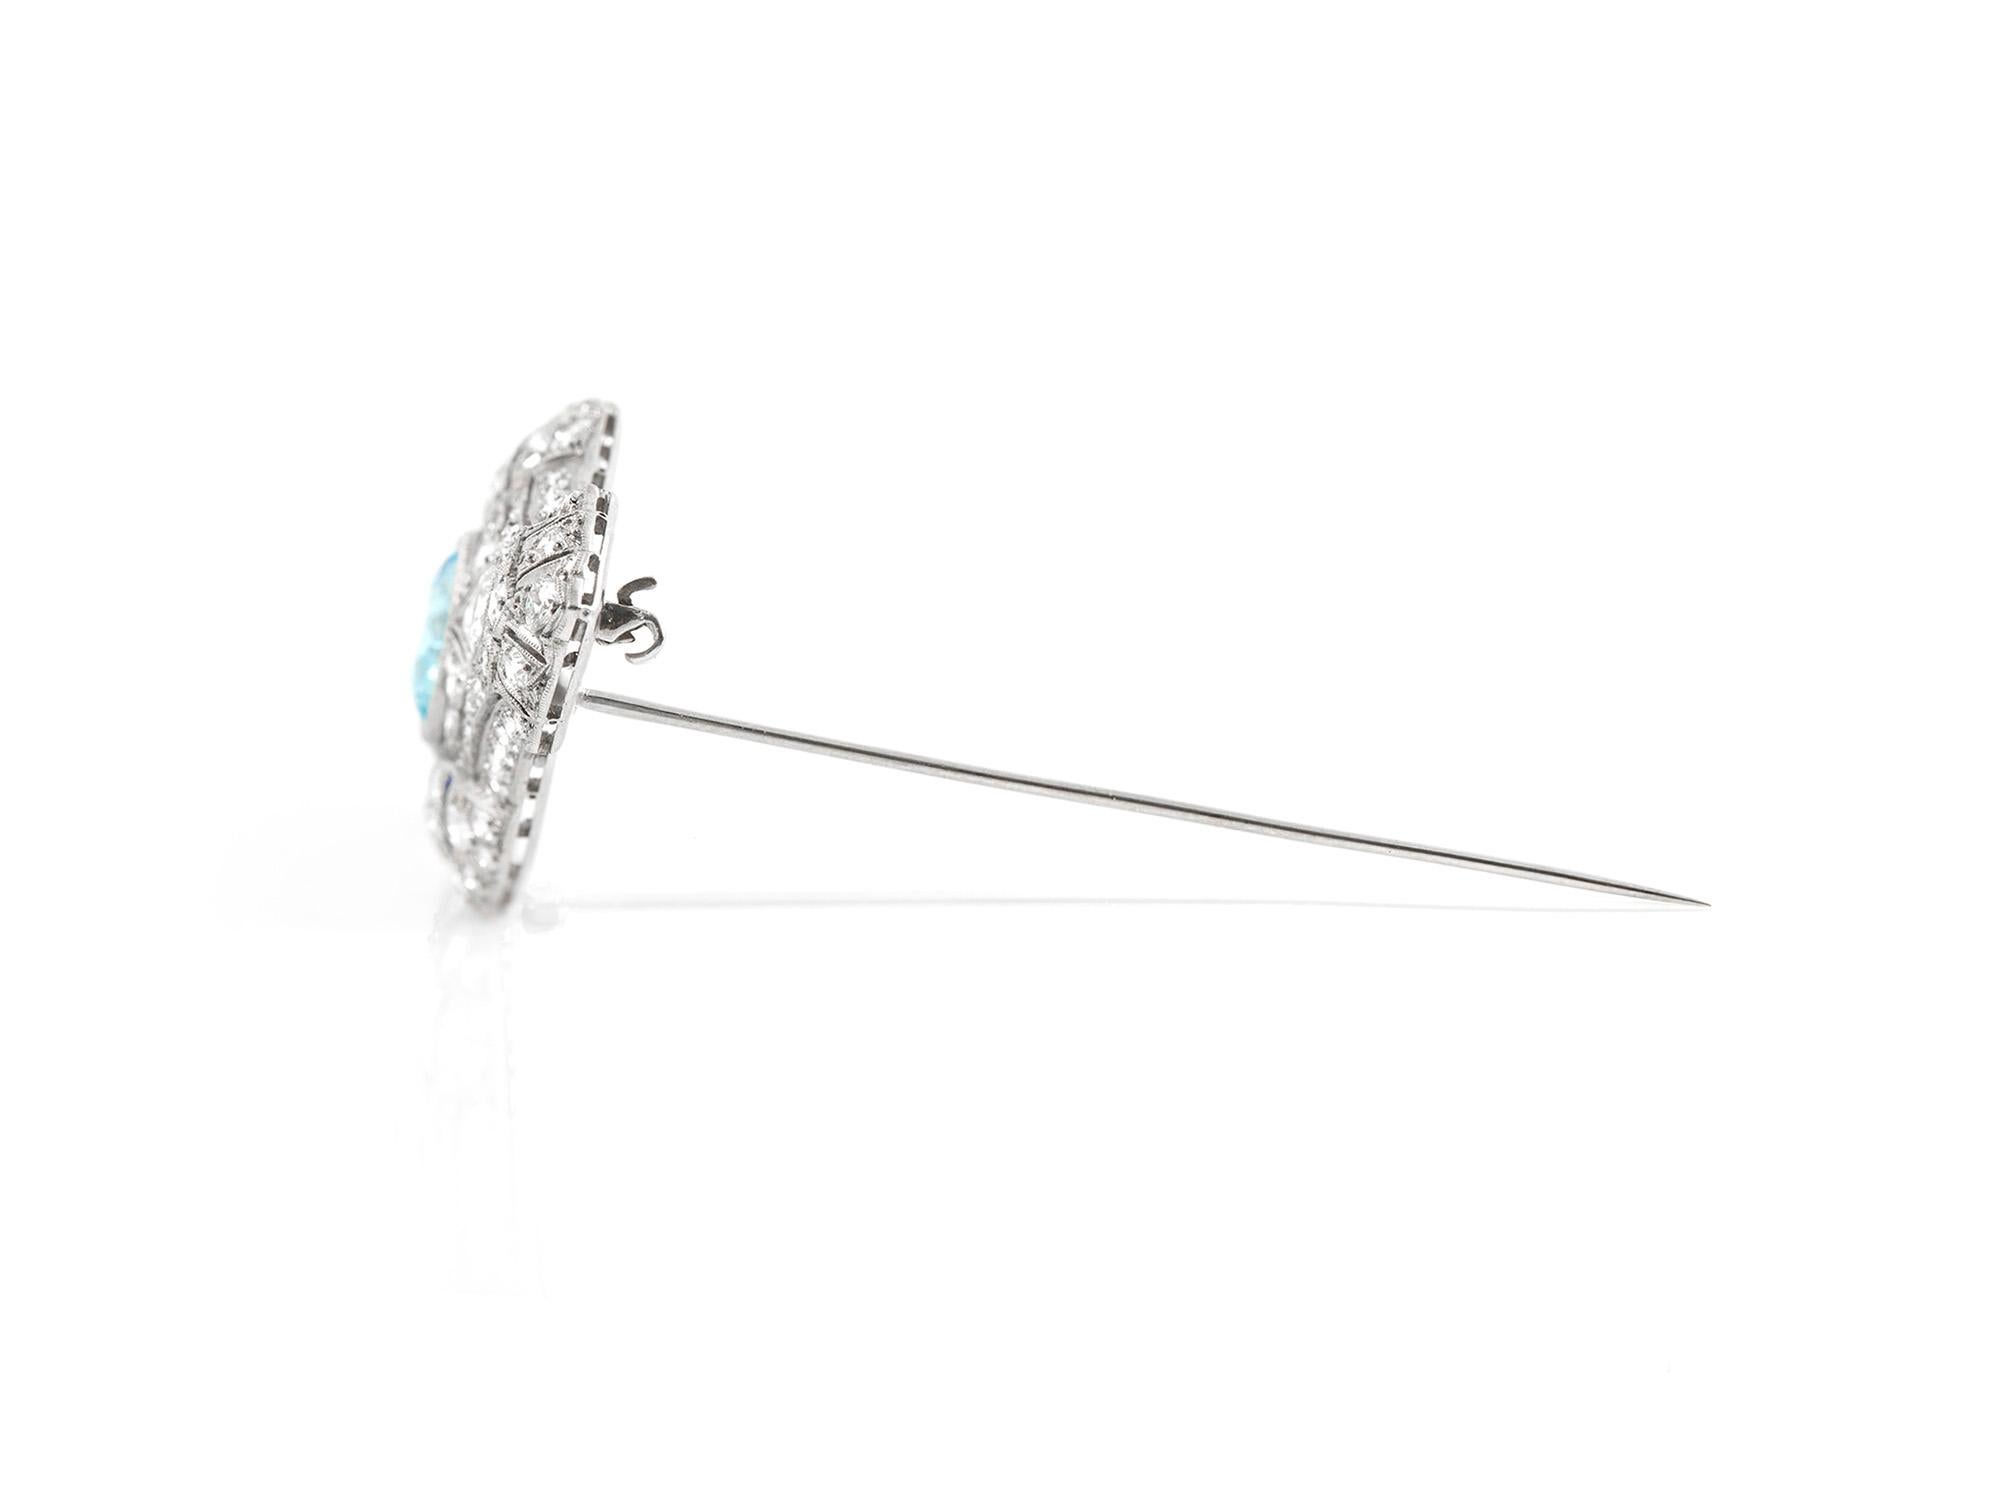 Aqua Marine and Daimond Platinum Brooch In Good Condition For Sale In New York, NY